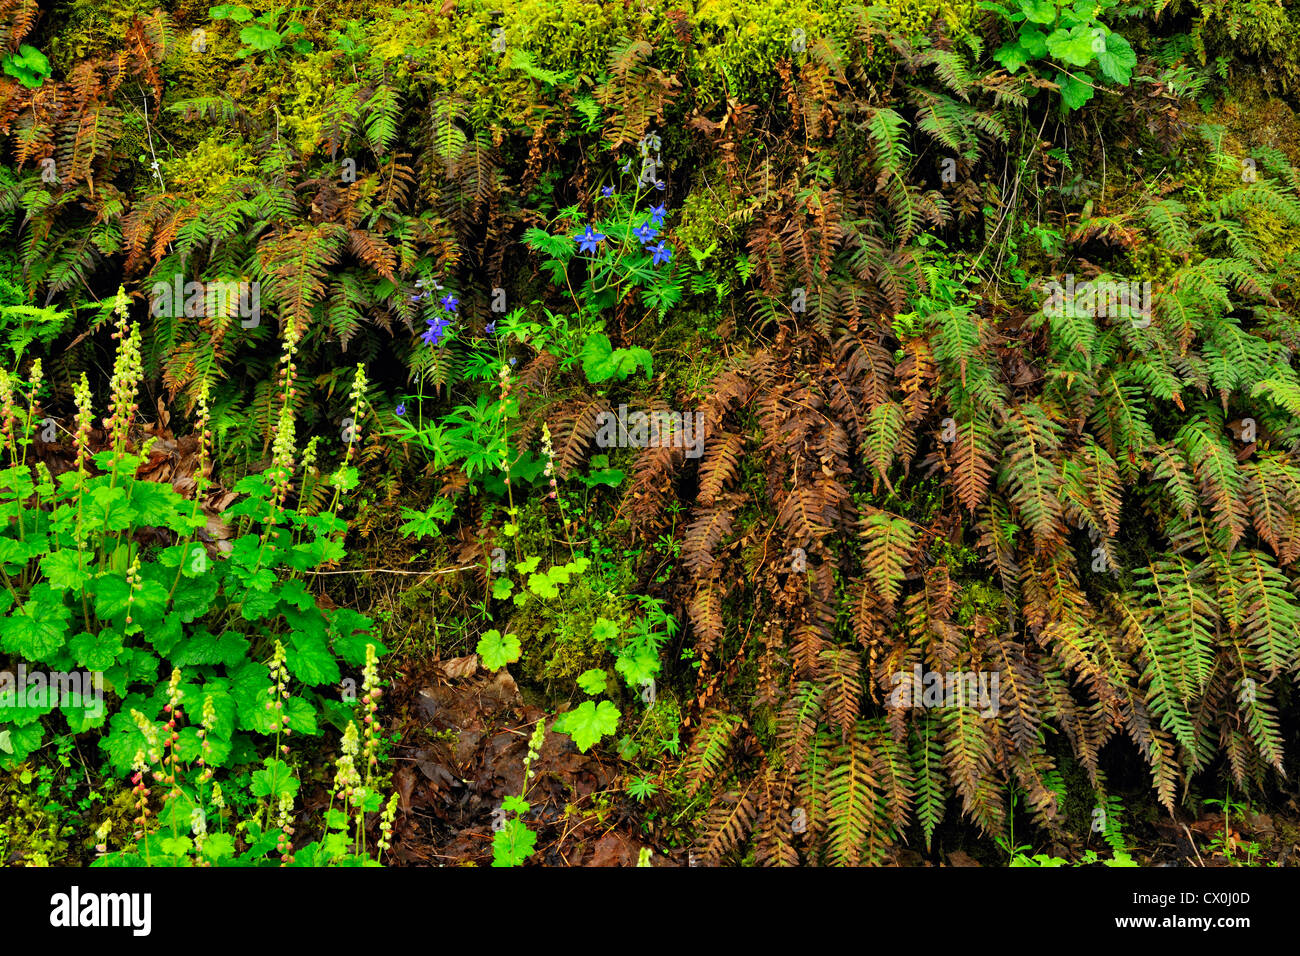 Spring ferns and flowers in the Columbia River Gorge, Columbia Gorge National Scenic Area, Oregon, USA Stock Photo